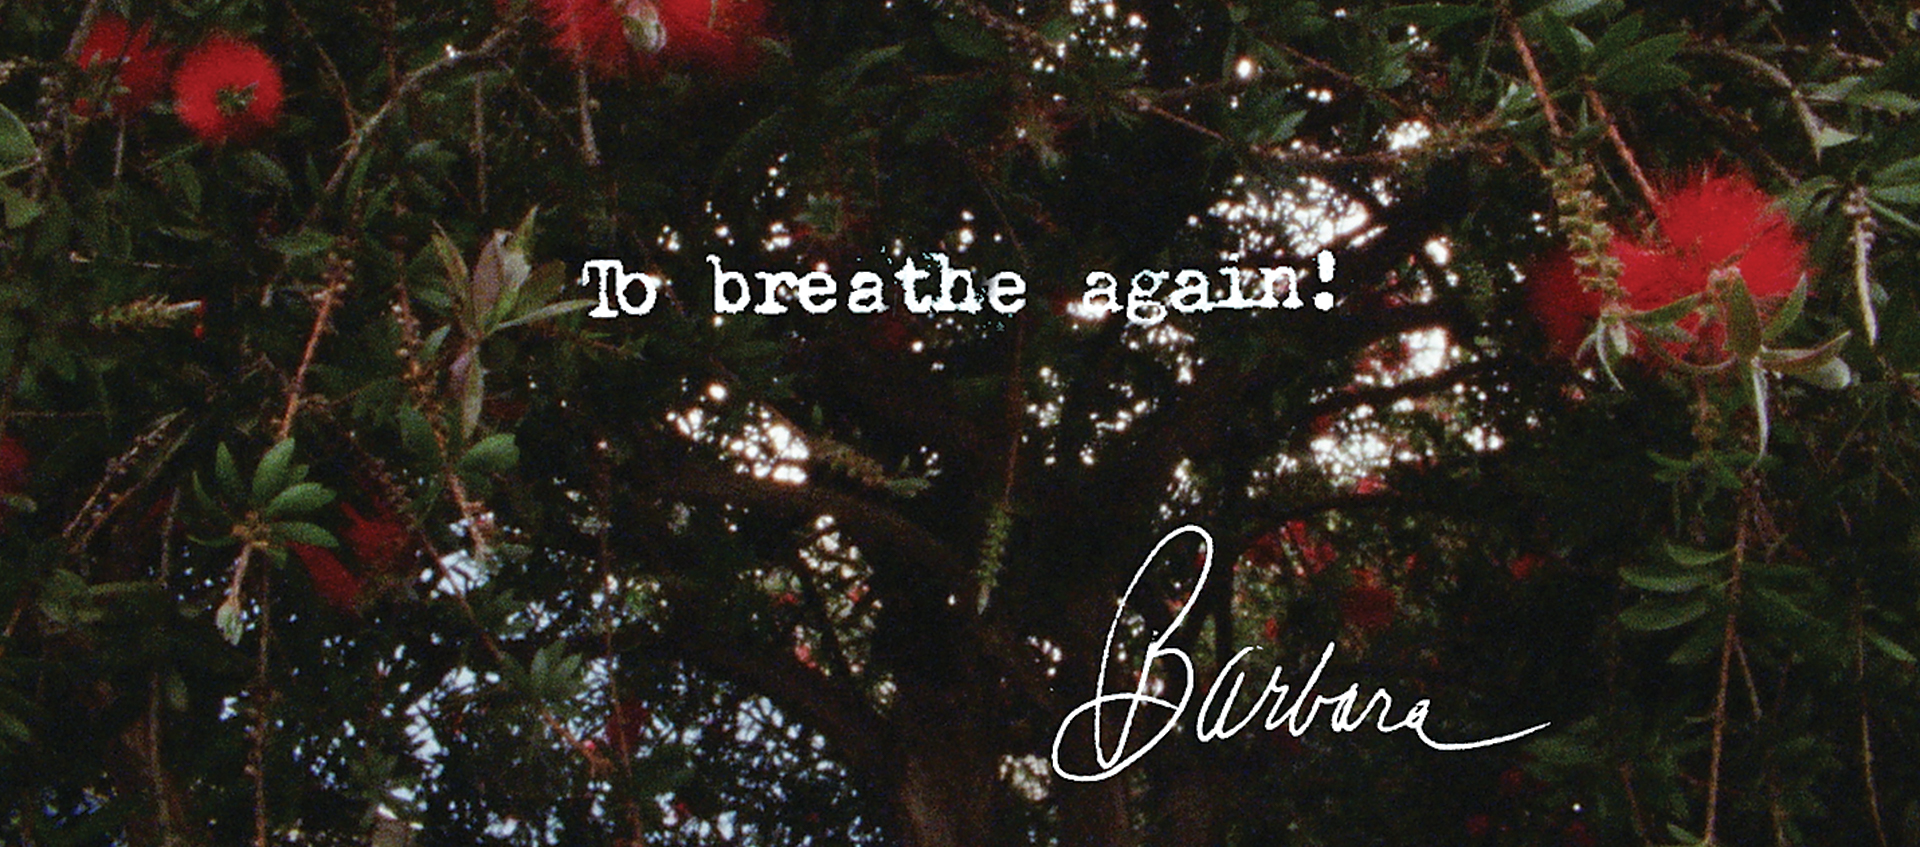 Foliage with text overlay to breath again